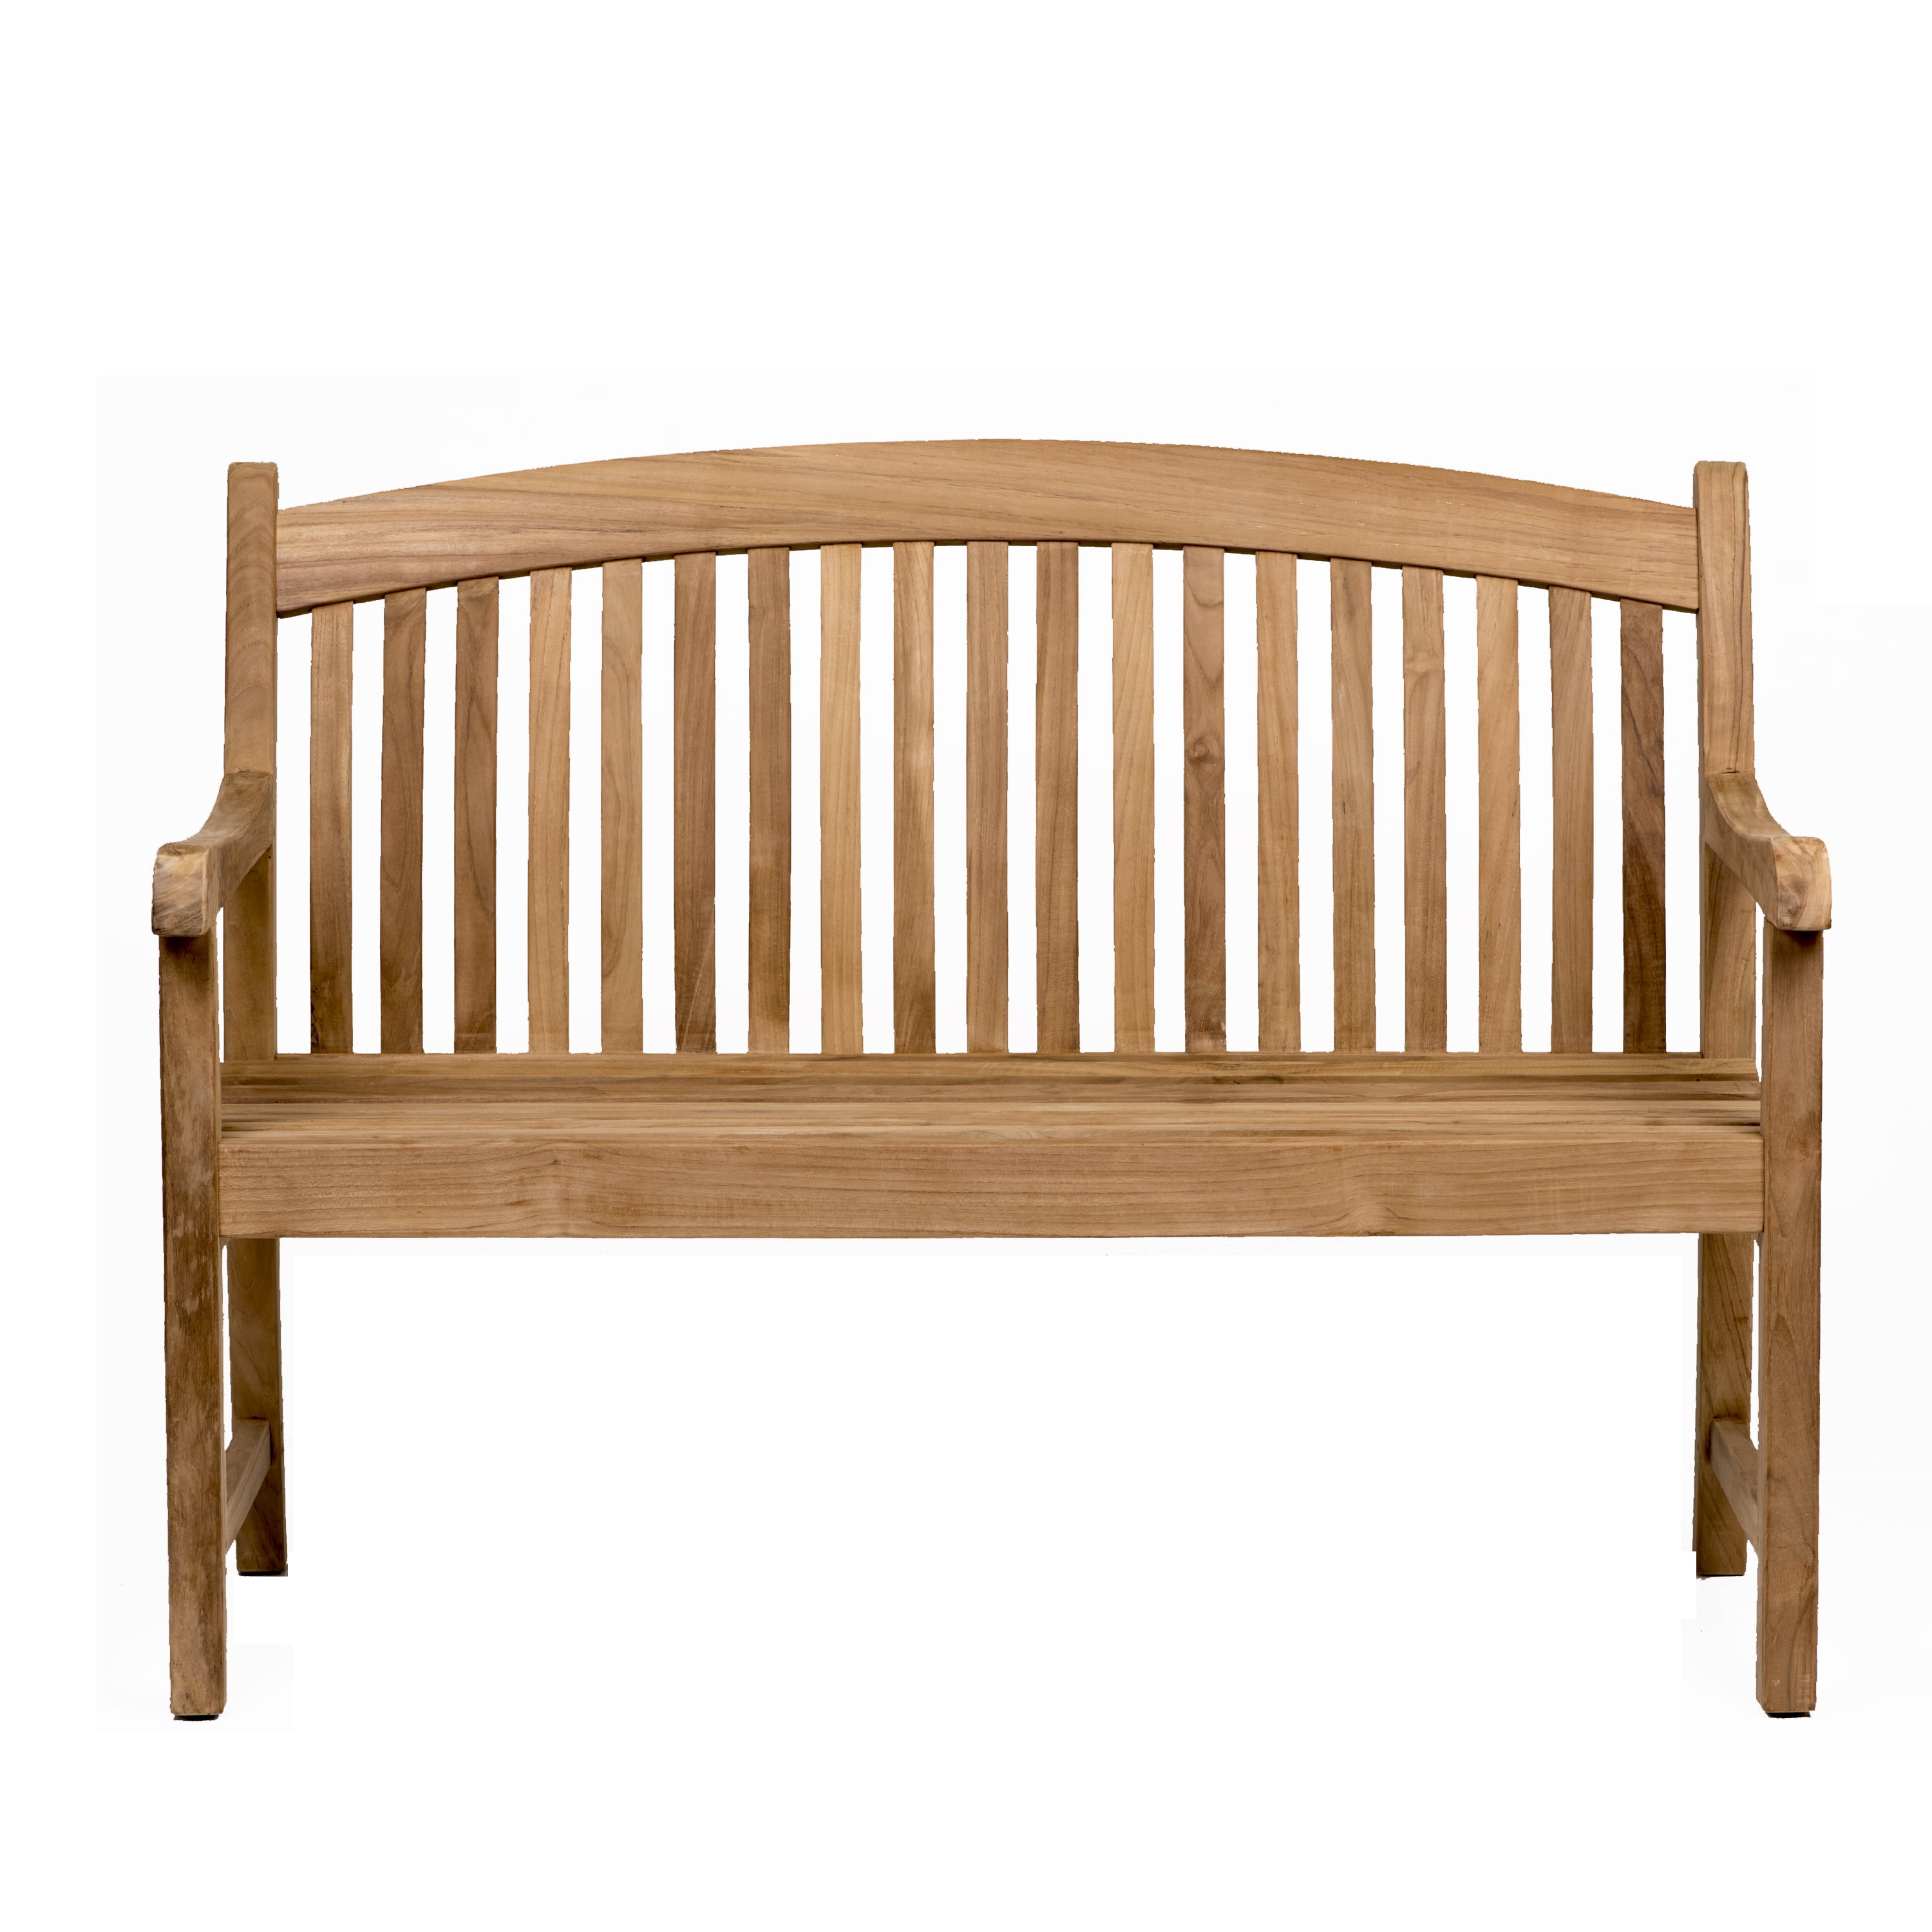 Photo 1 of Amazonia Newham 1-piece Patio Bench | Certified Teak | Ideal for Outdoors and Indoors, Brown